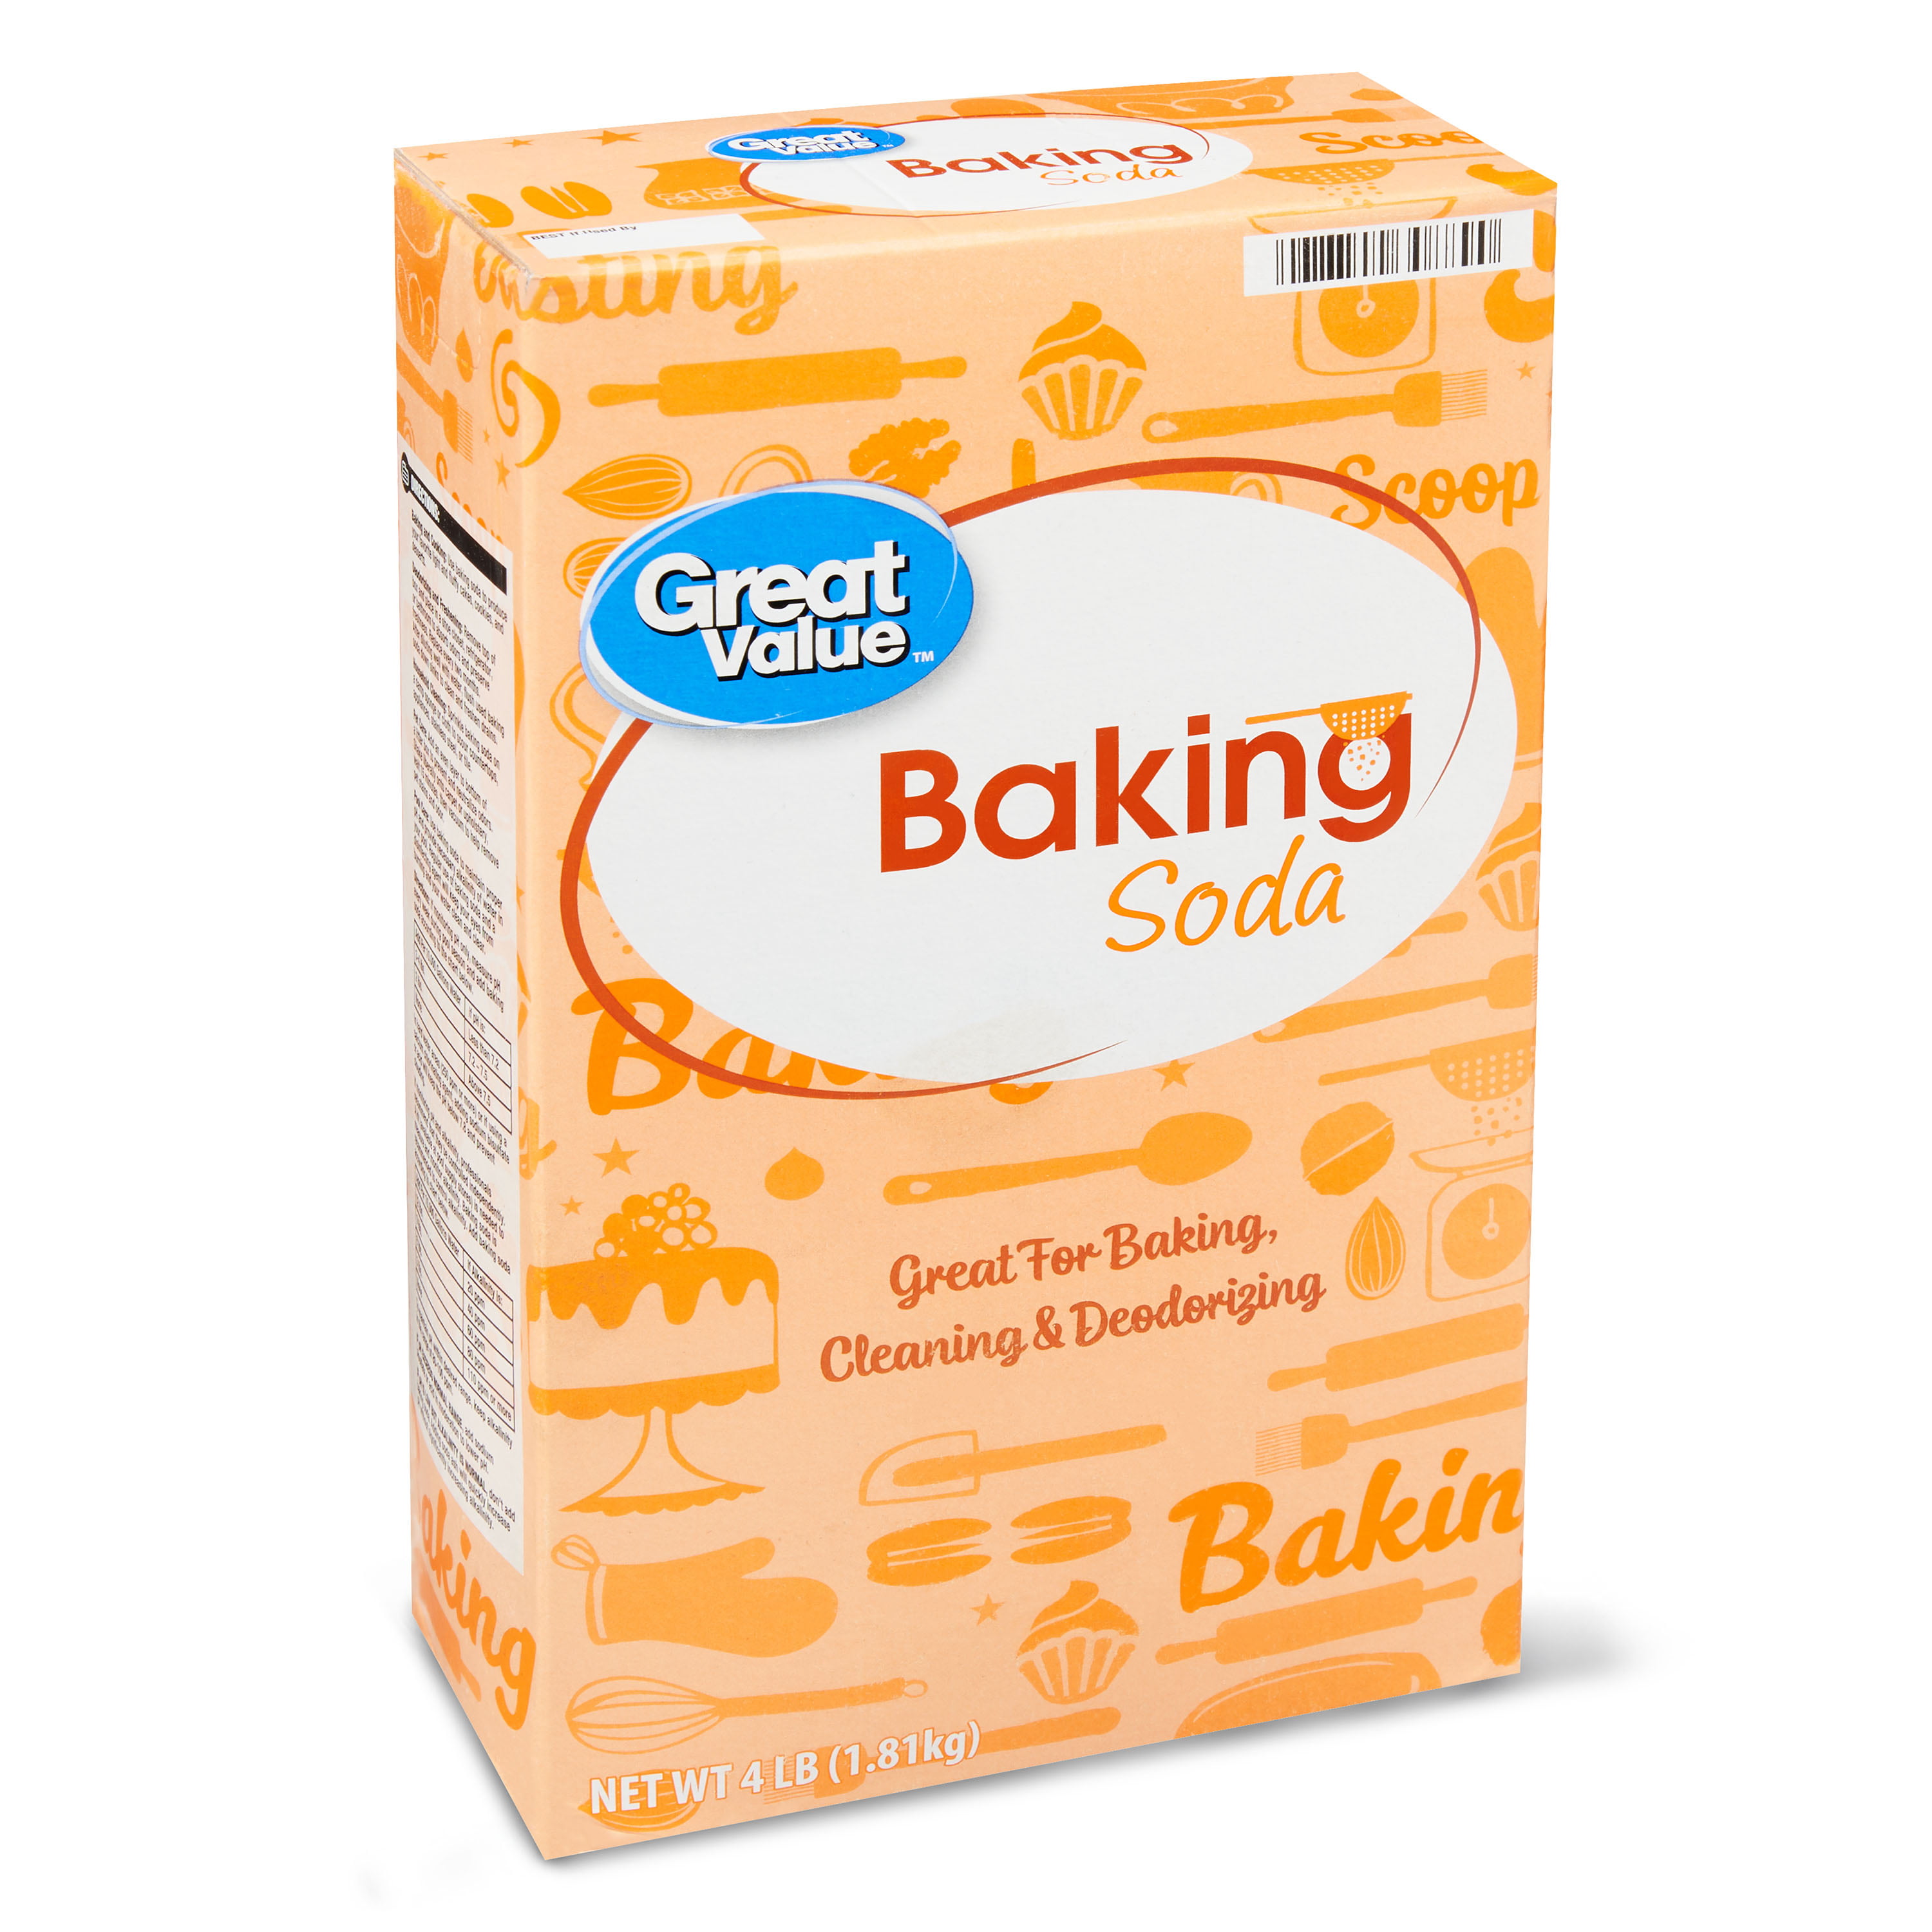 Buy Great Value Baking Soda 64 Oz Online At Lowest Price In India